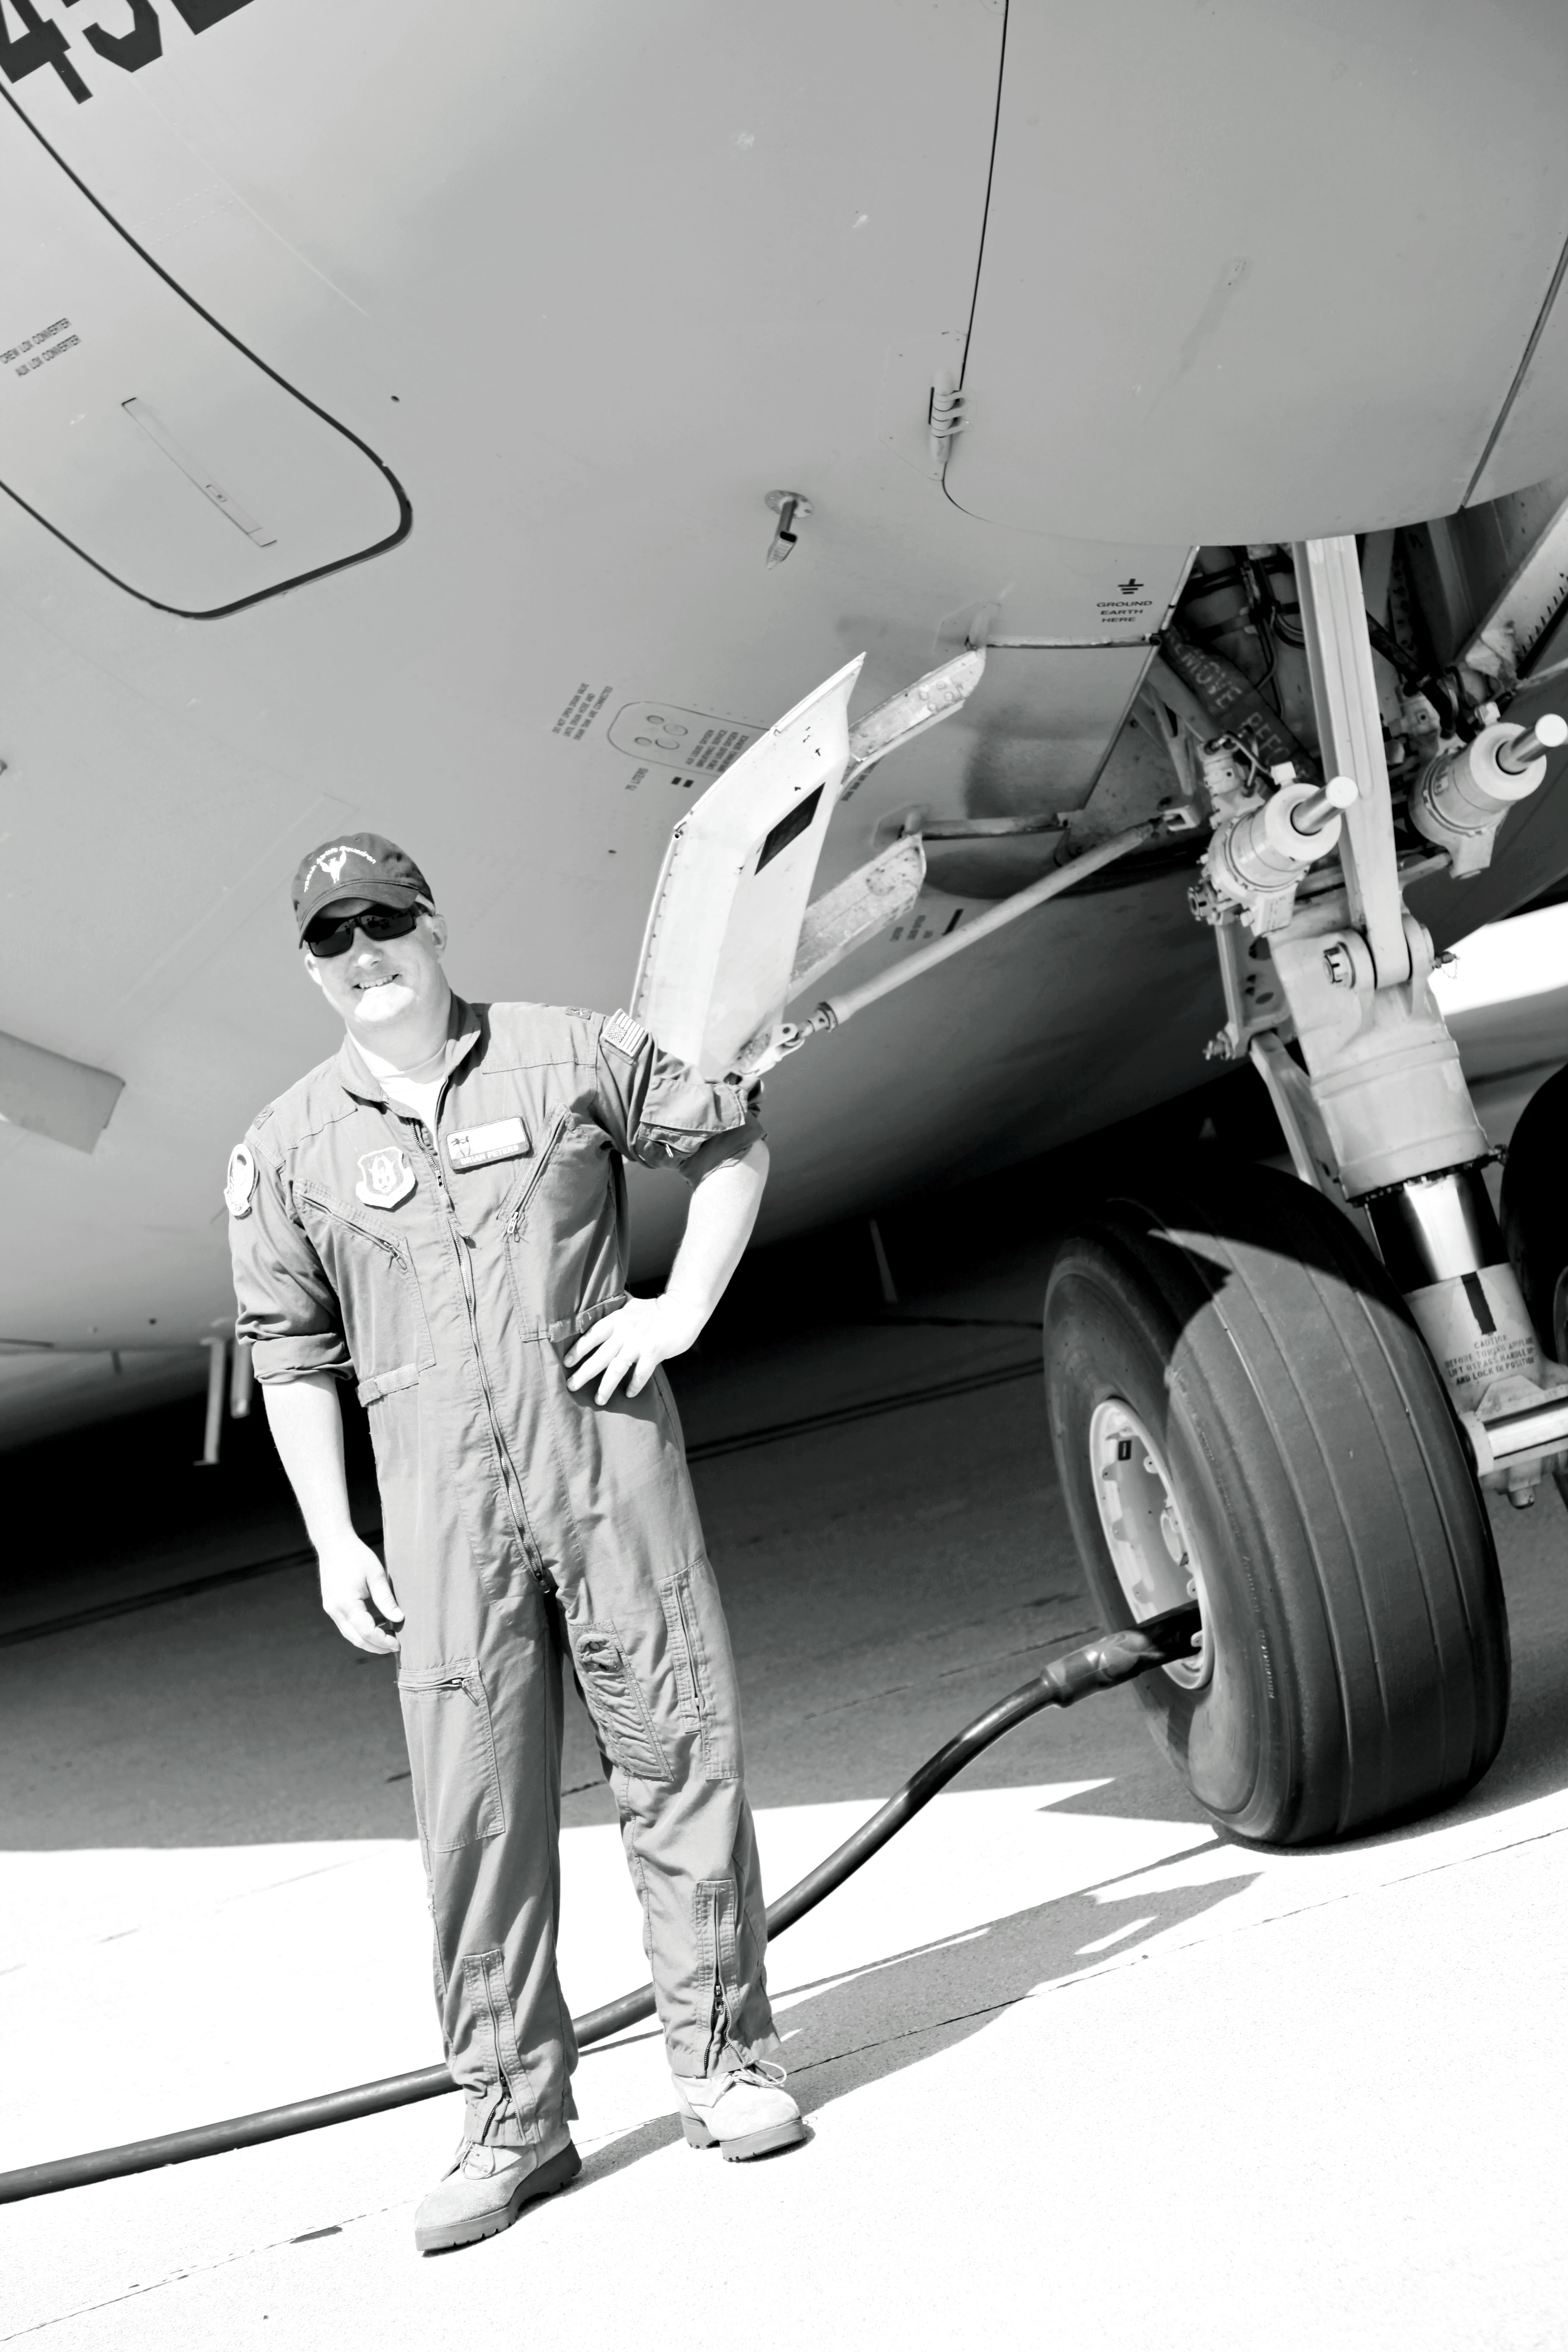 Lt. Col. Brian Peters in front of an aircraft